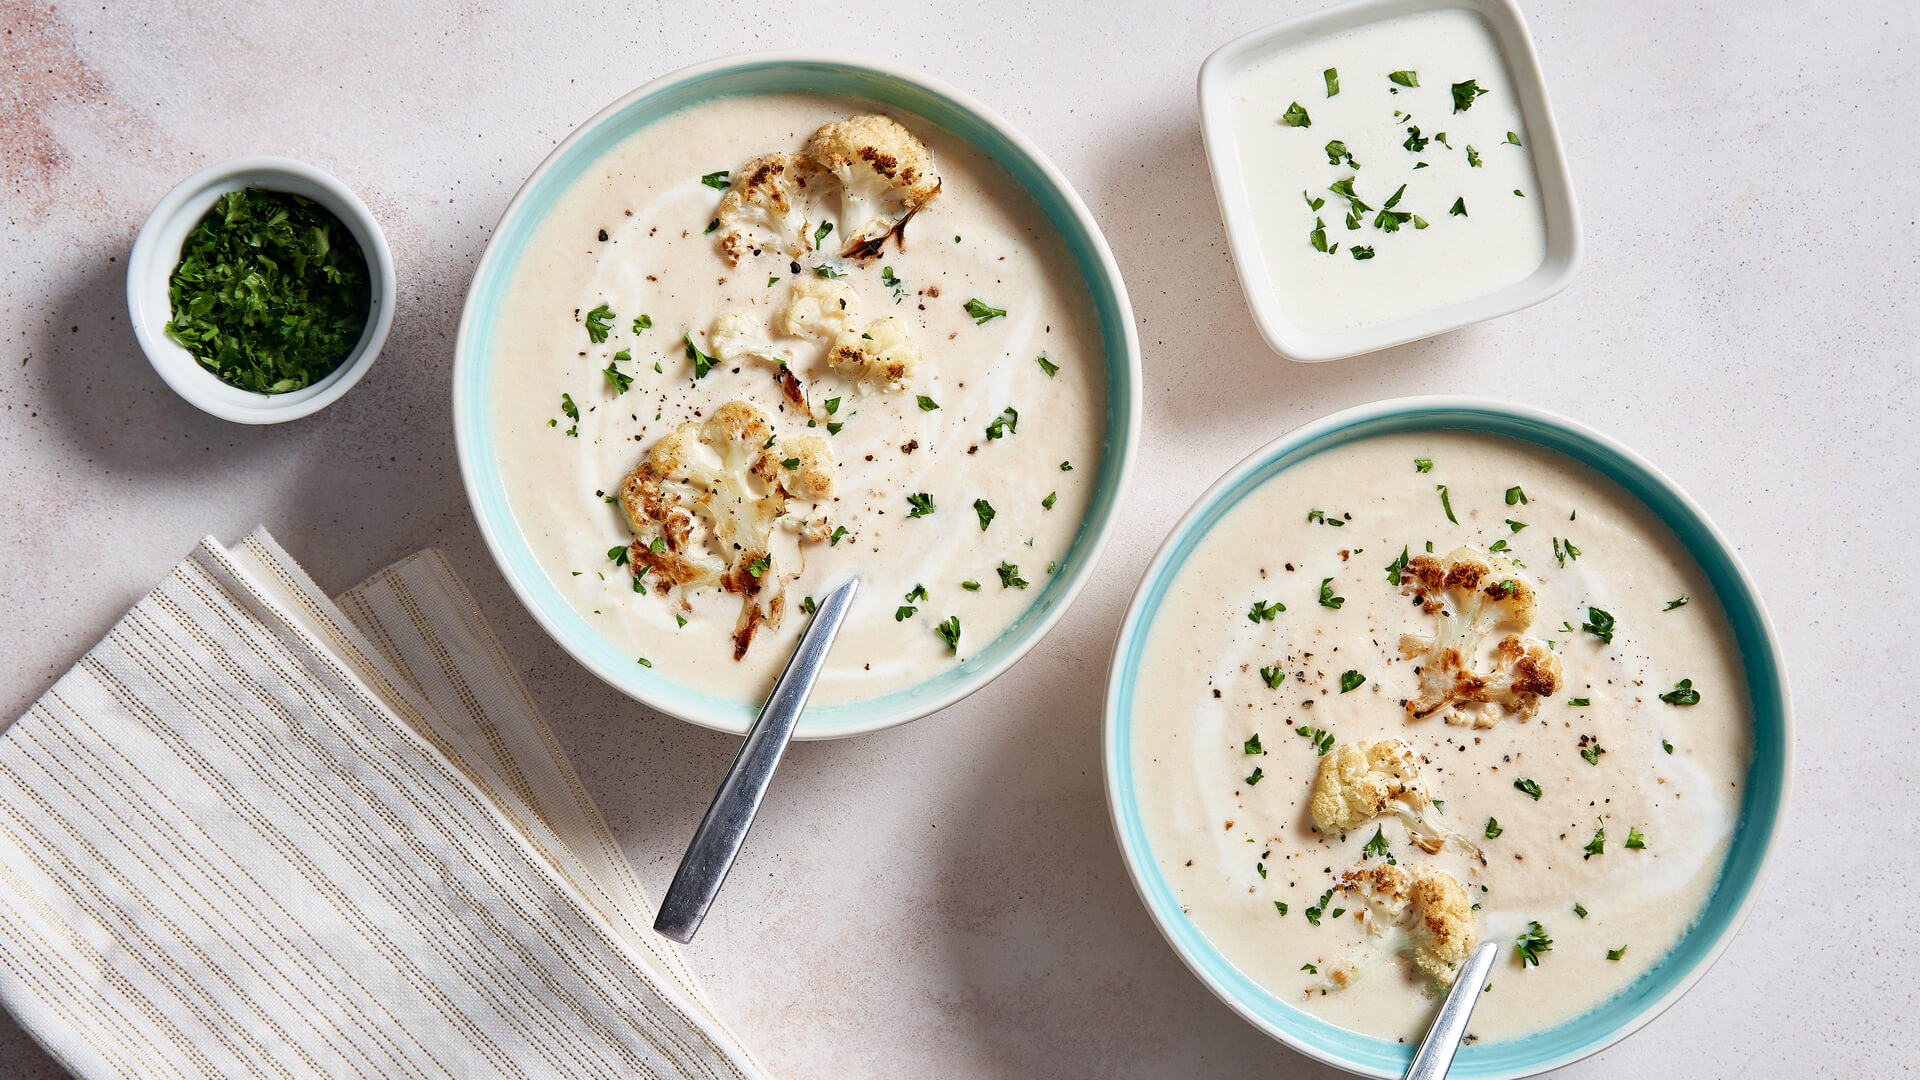  Two bowls of cauliflower soup sprinkled with chopped parsley 